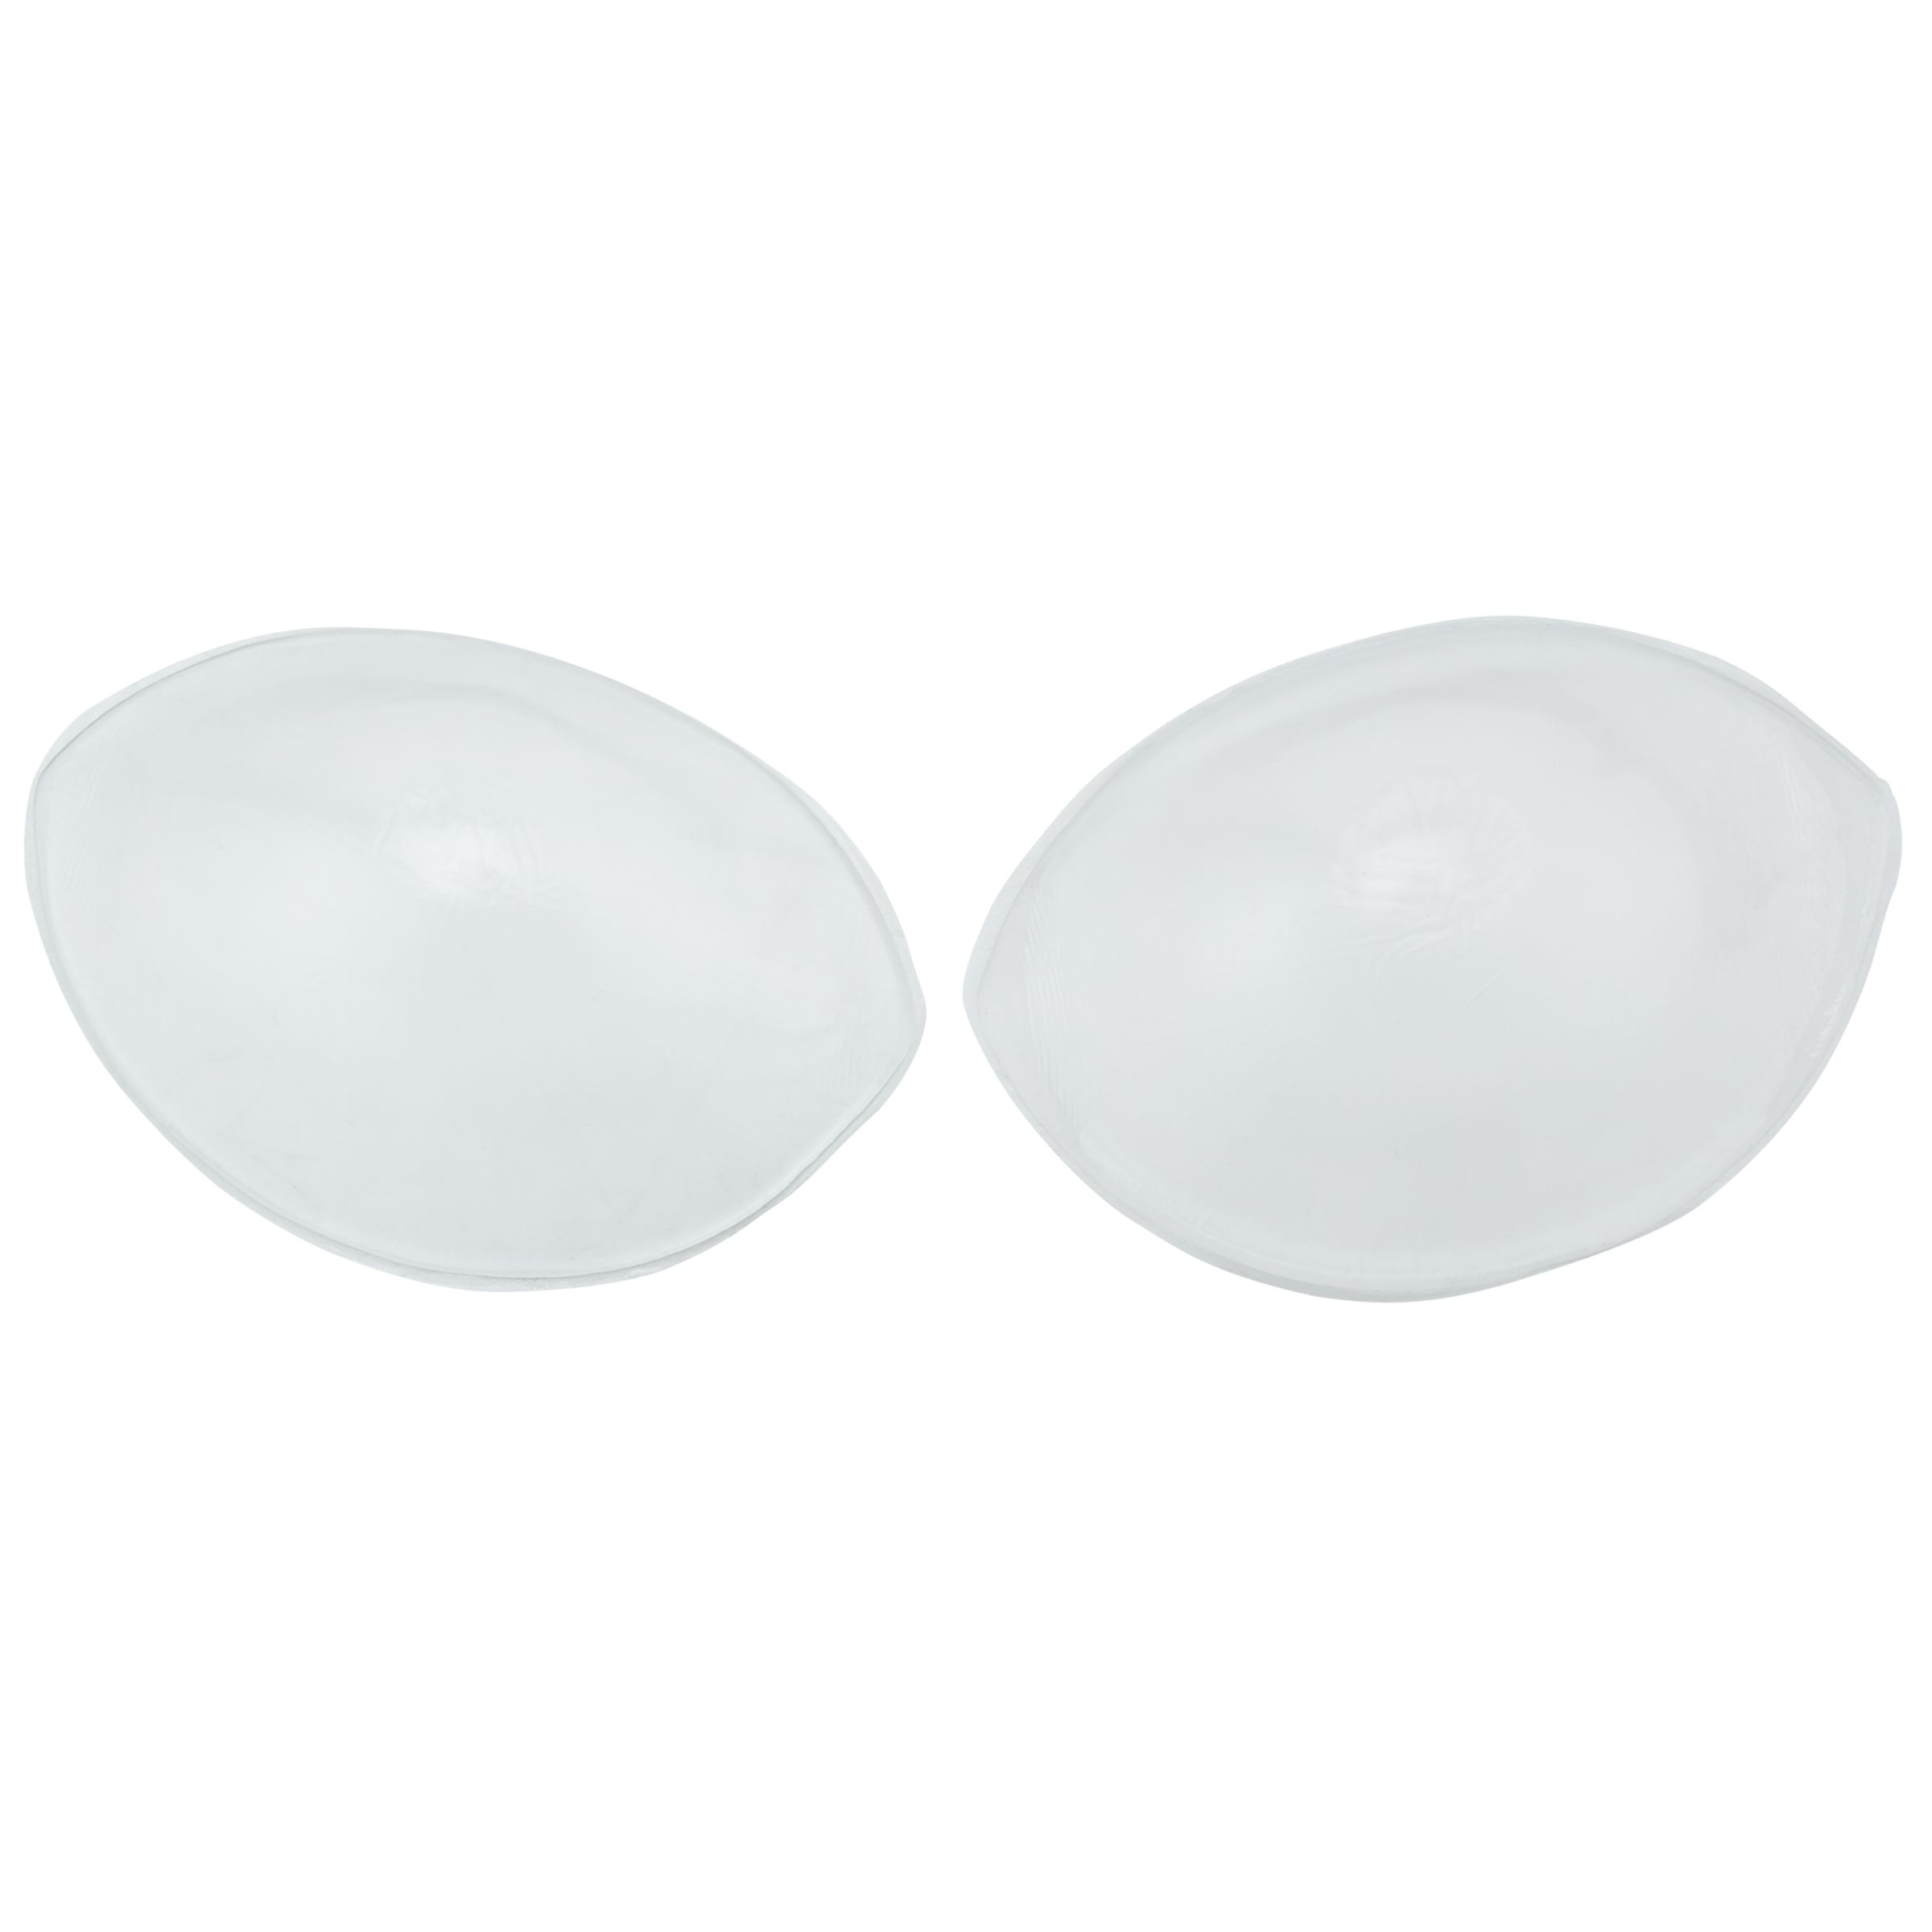 fashion-forms-silicone-skin-adhesive-bra-clear-at-john-lewis-partners